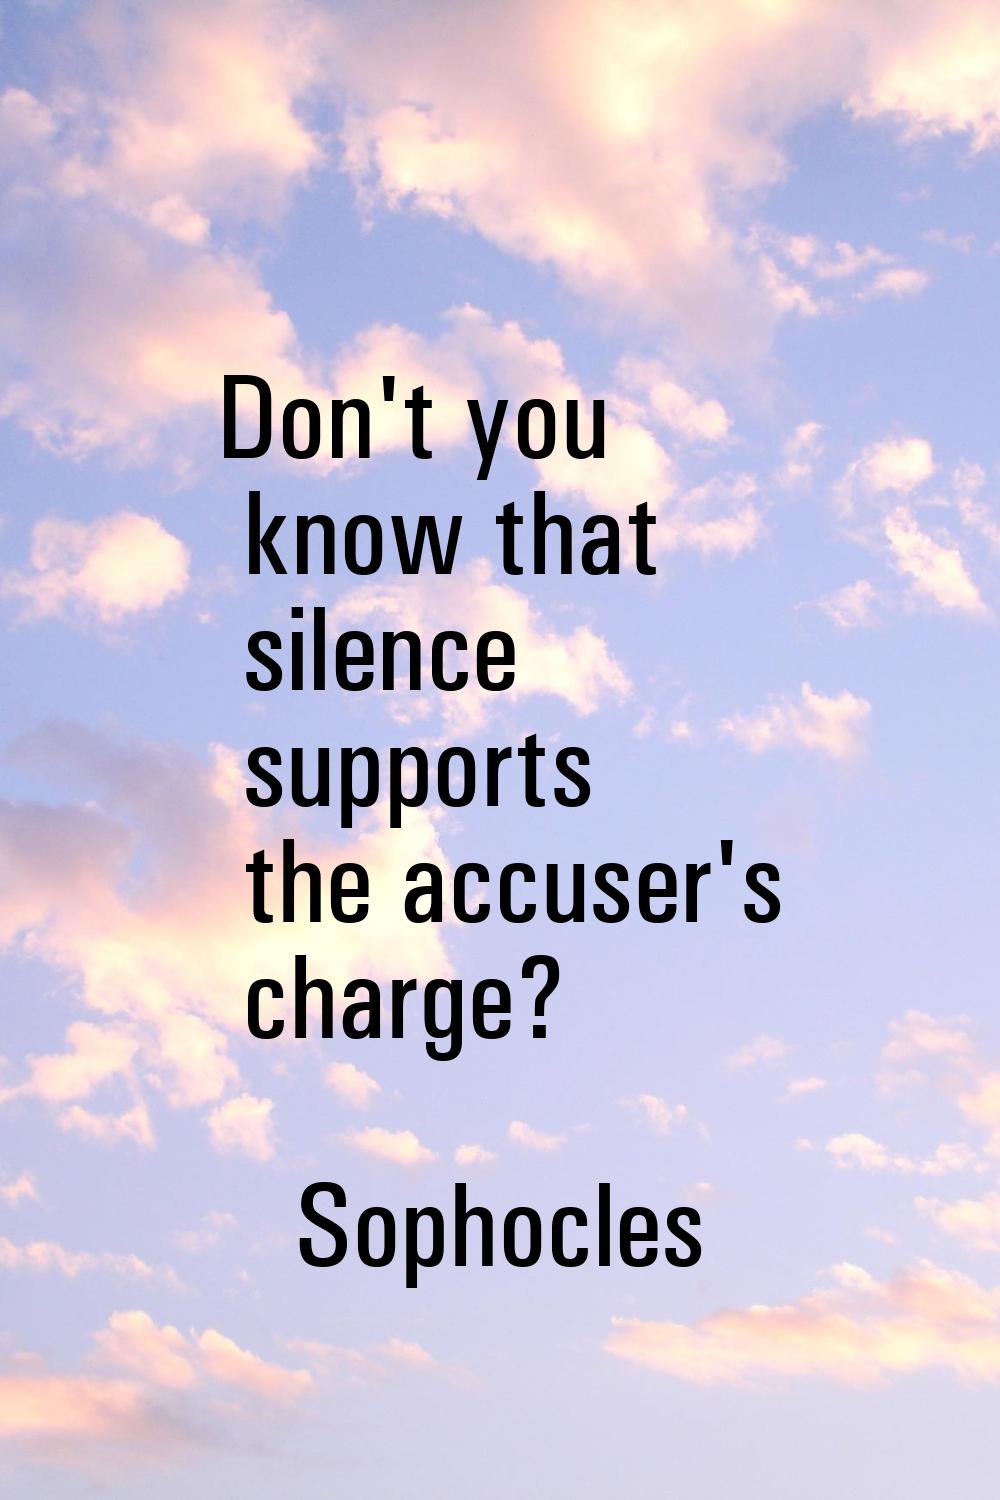 Don't you know that silence supports the accuser's charge?